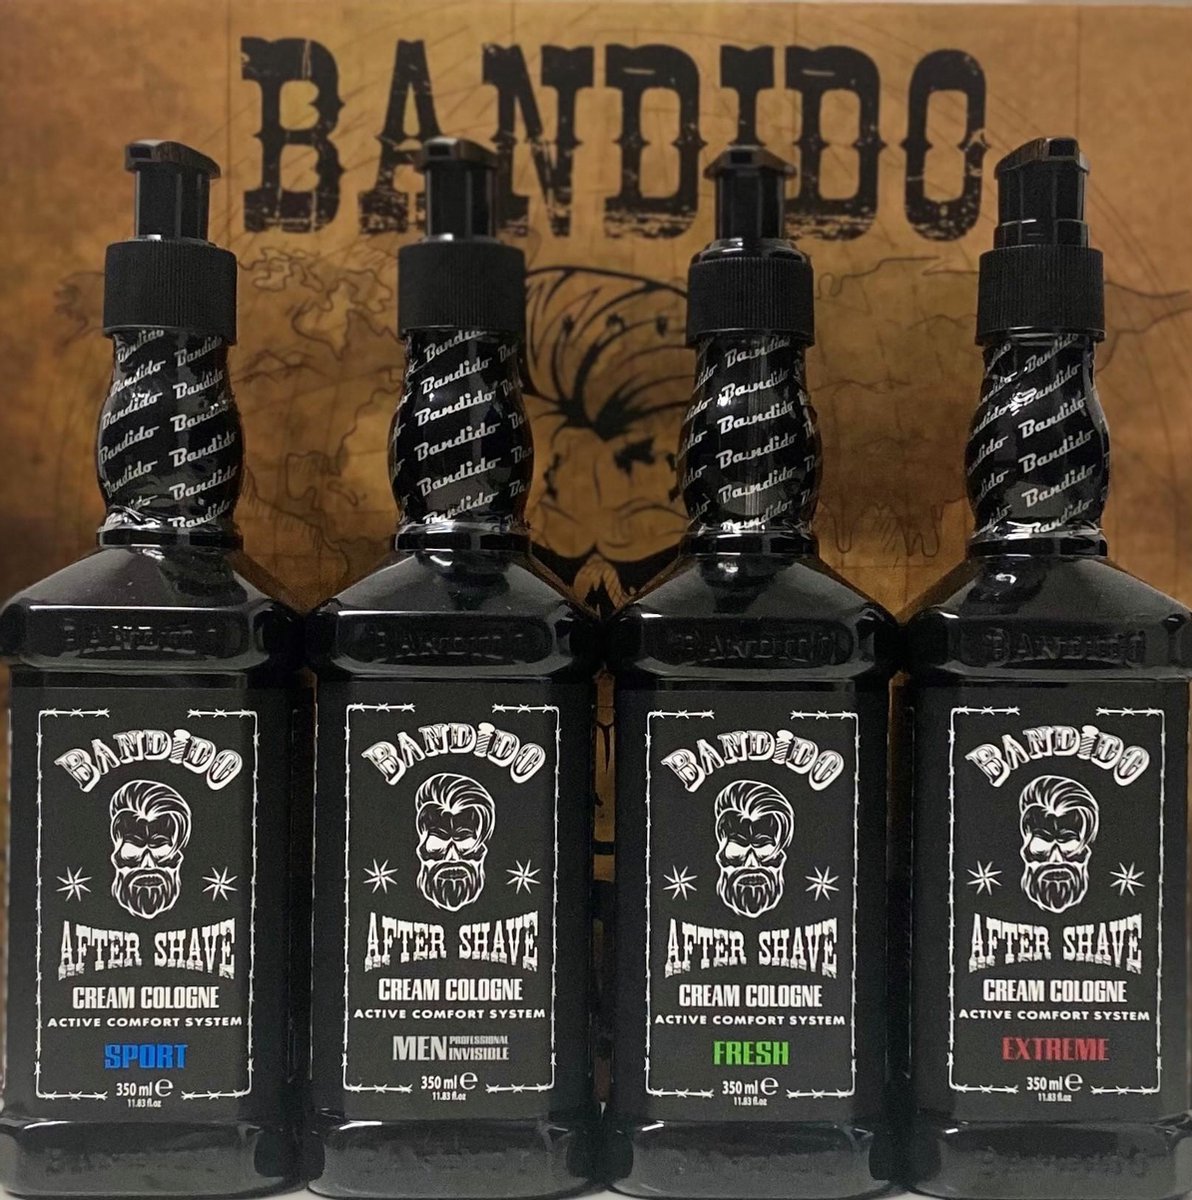 4-Pack Bandido Aftershave Cream Cologne (1x Fresh, 1x Extreme, 1x Sport, 1x Men Invisible)